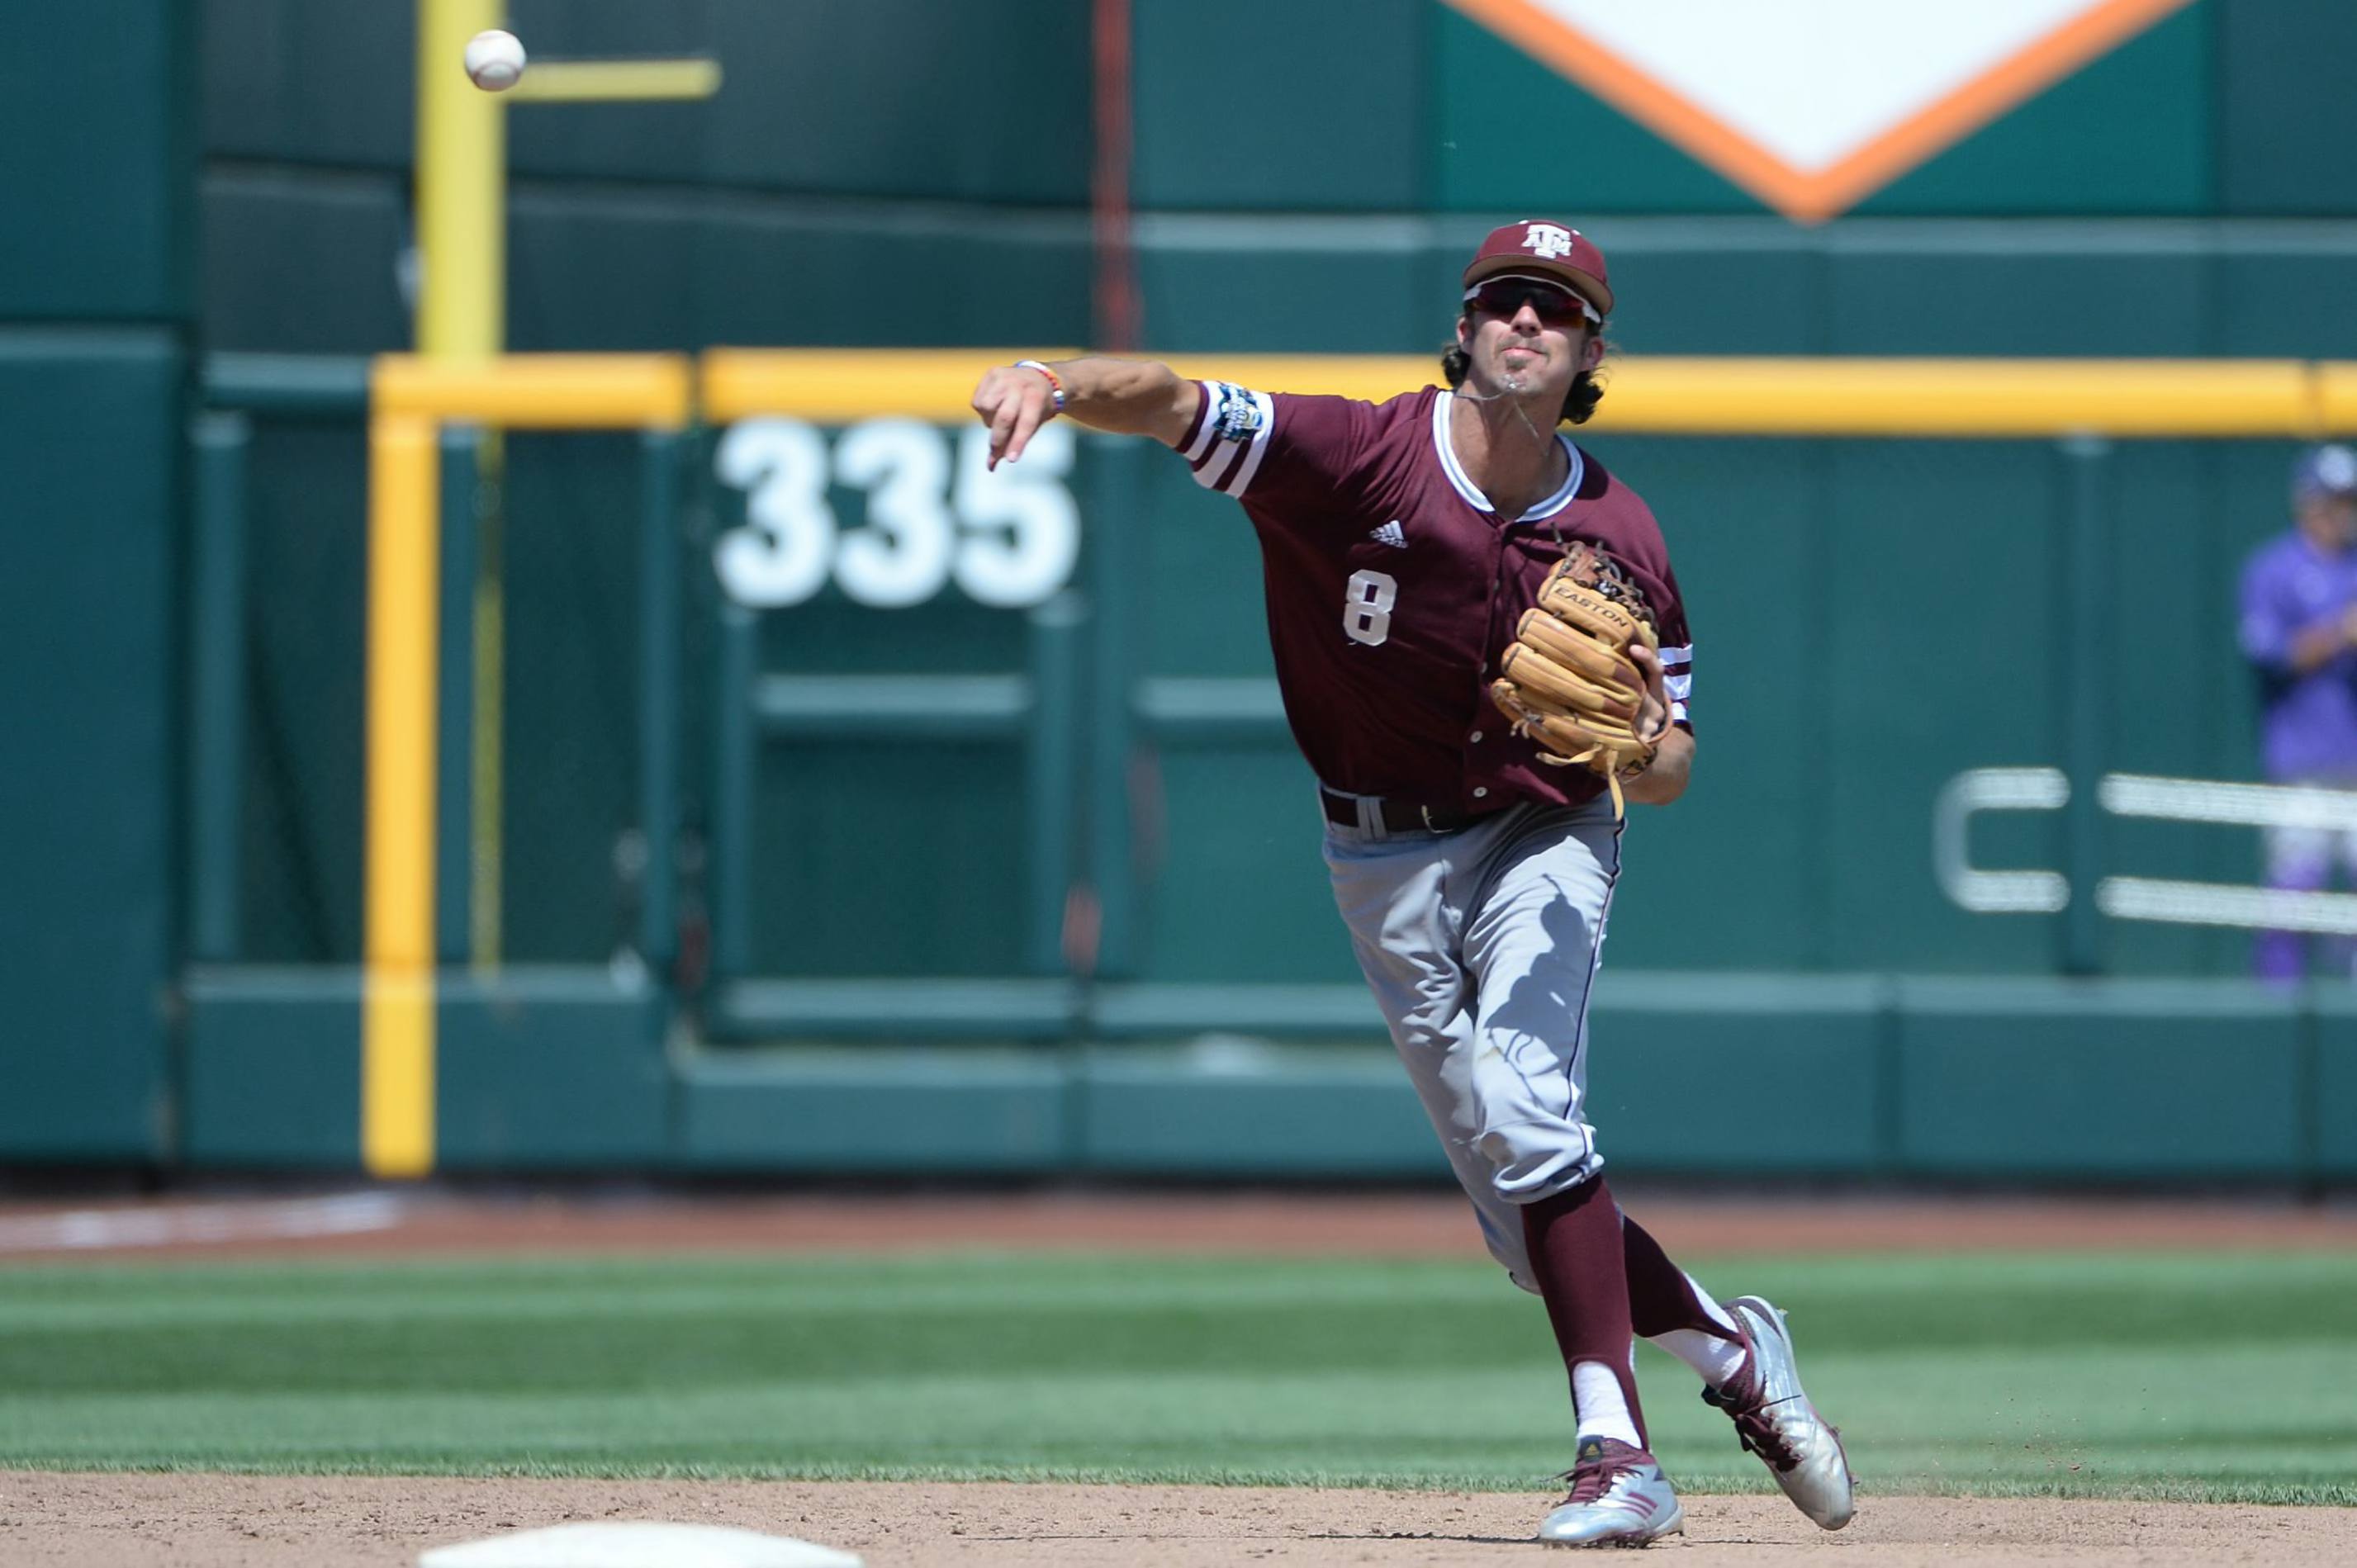 Texas A&M Baseball A wild season ends at the College World Series Page 3